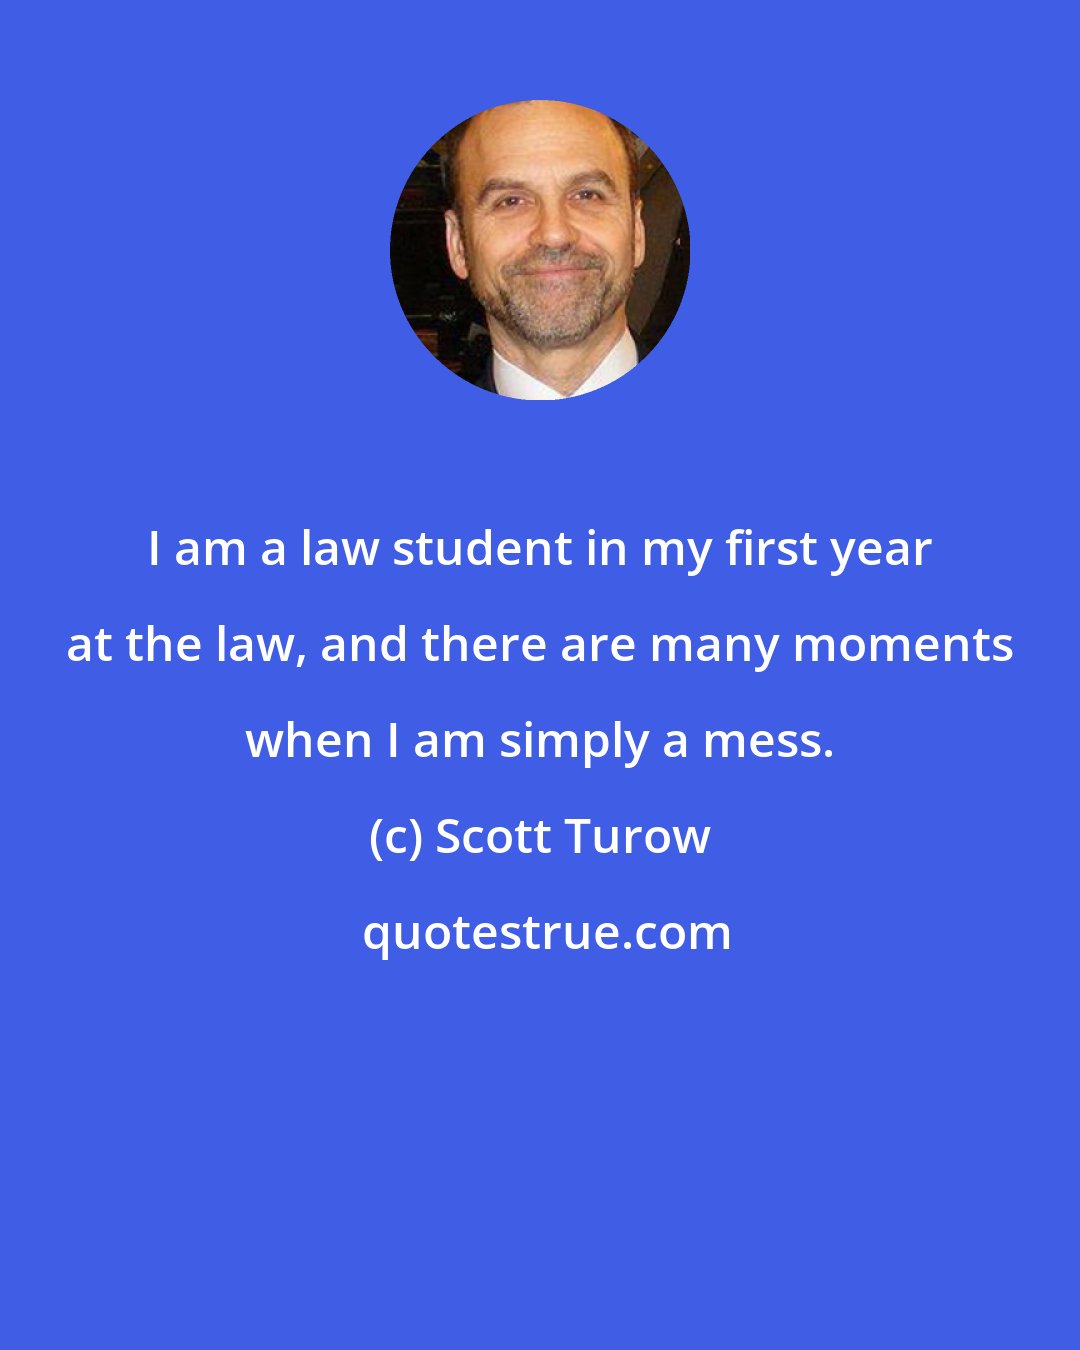 Scott Turow: I am a law student in my first year at the law, and there are many moments when I am simply a mess.